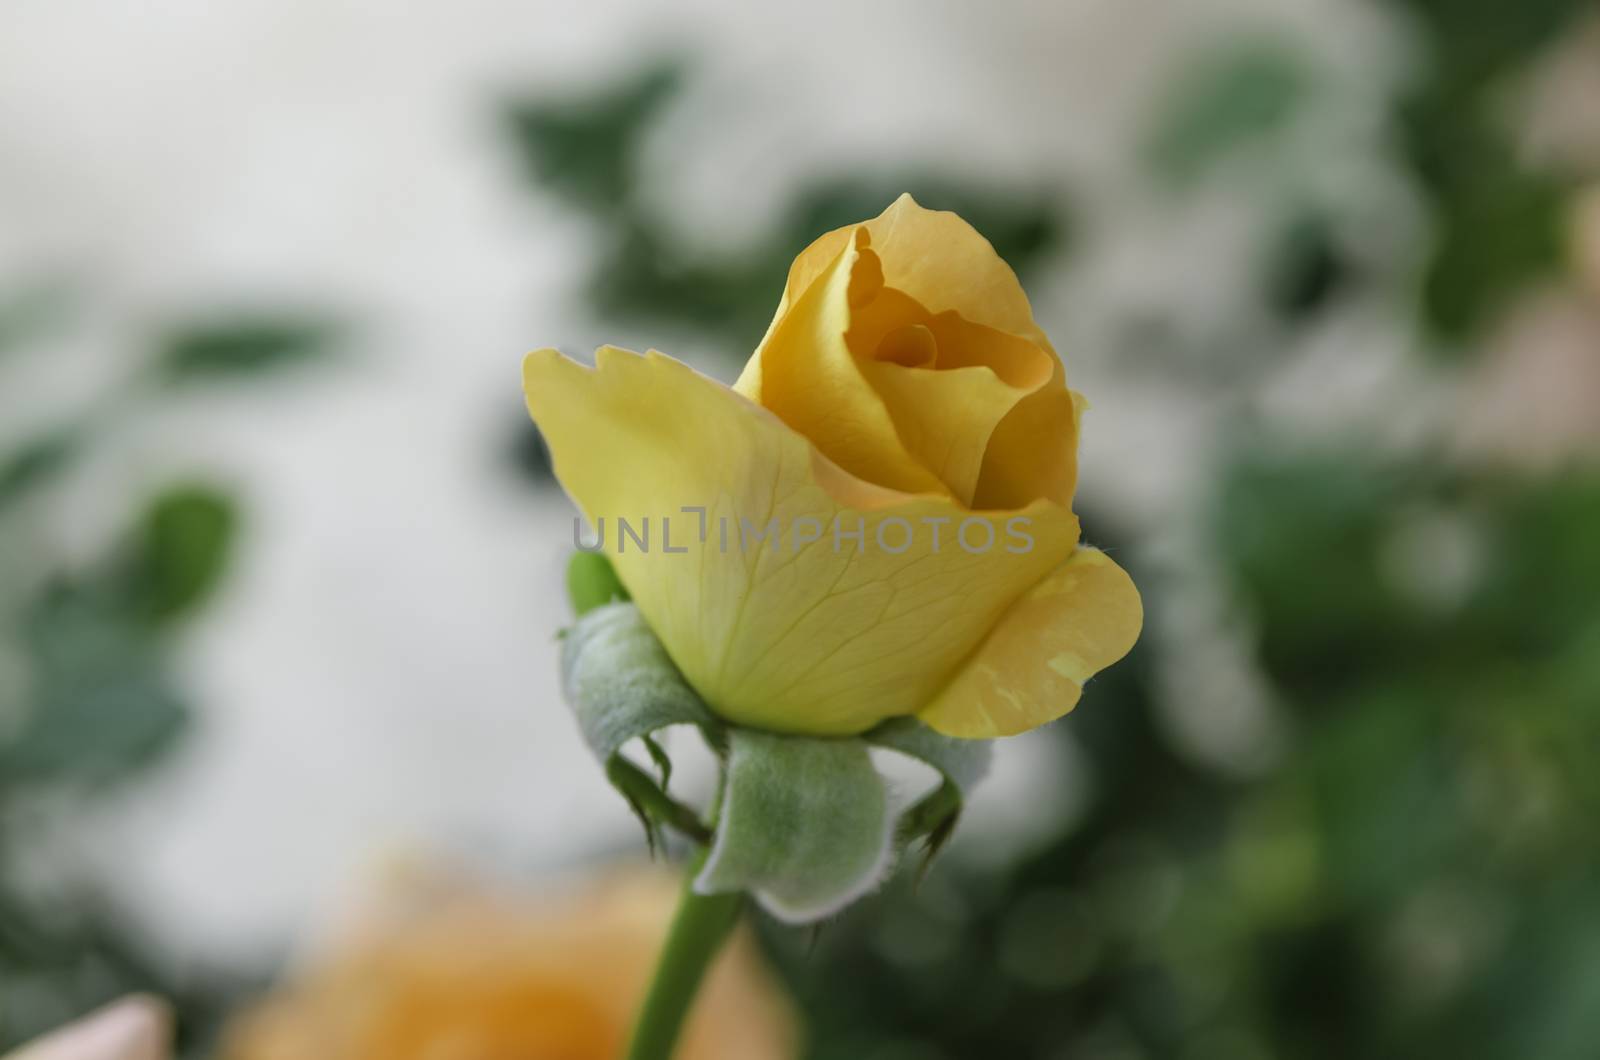 the yellow rose flower  in the garden